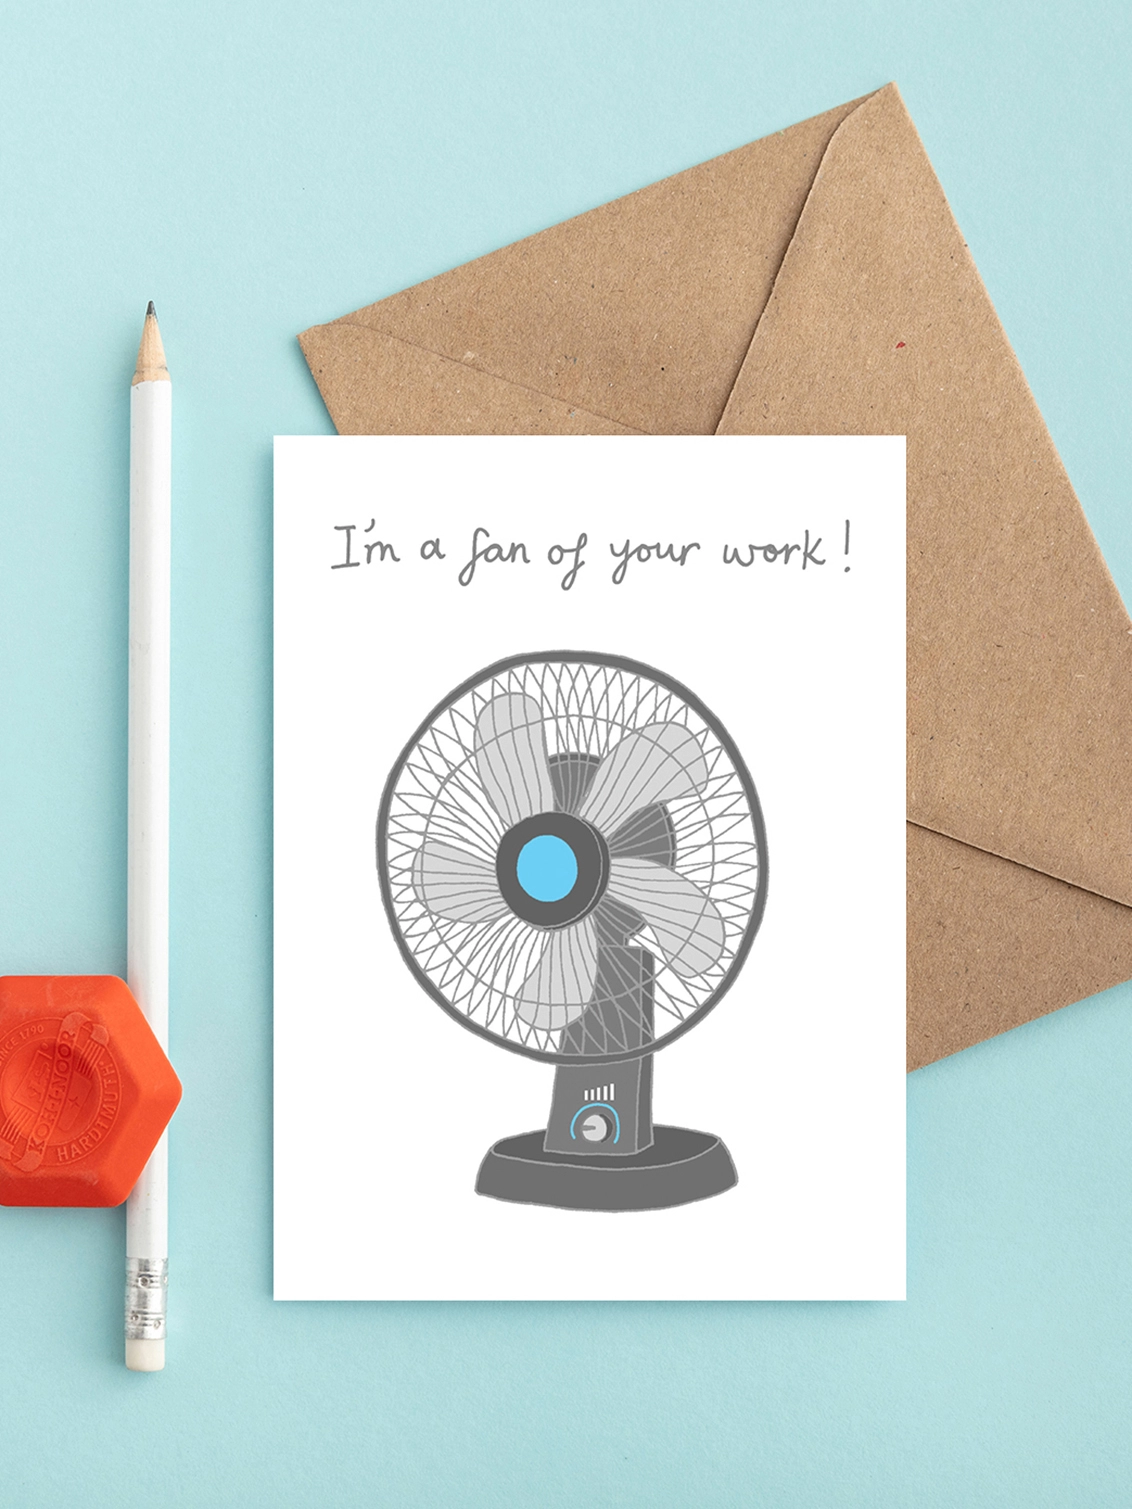 A funny congratulations card featuring an electric fan